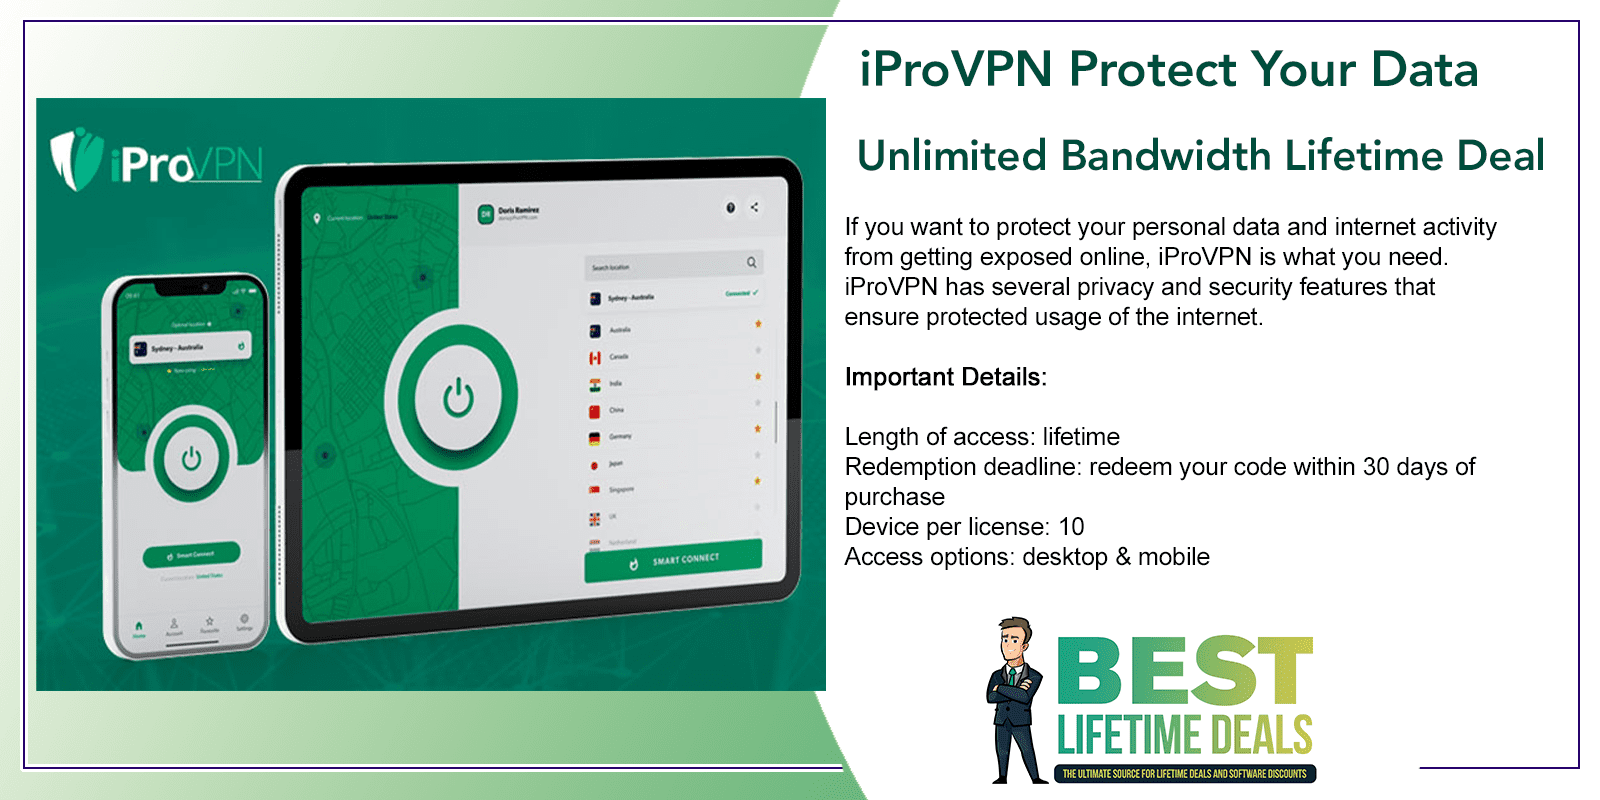 iProVPN Protect Your Data Unlimited Bandwidth Lifetime Deal